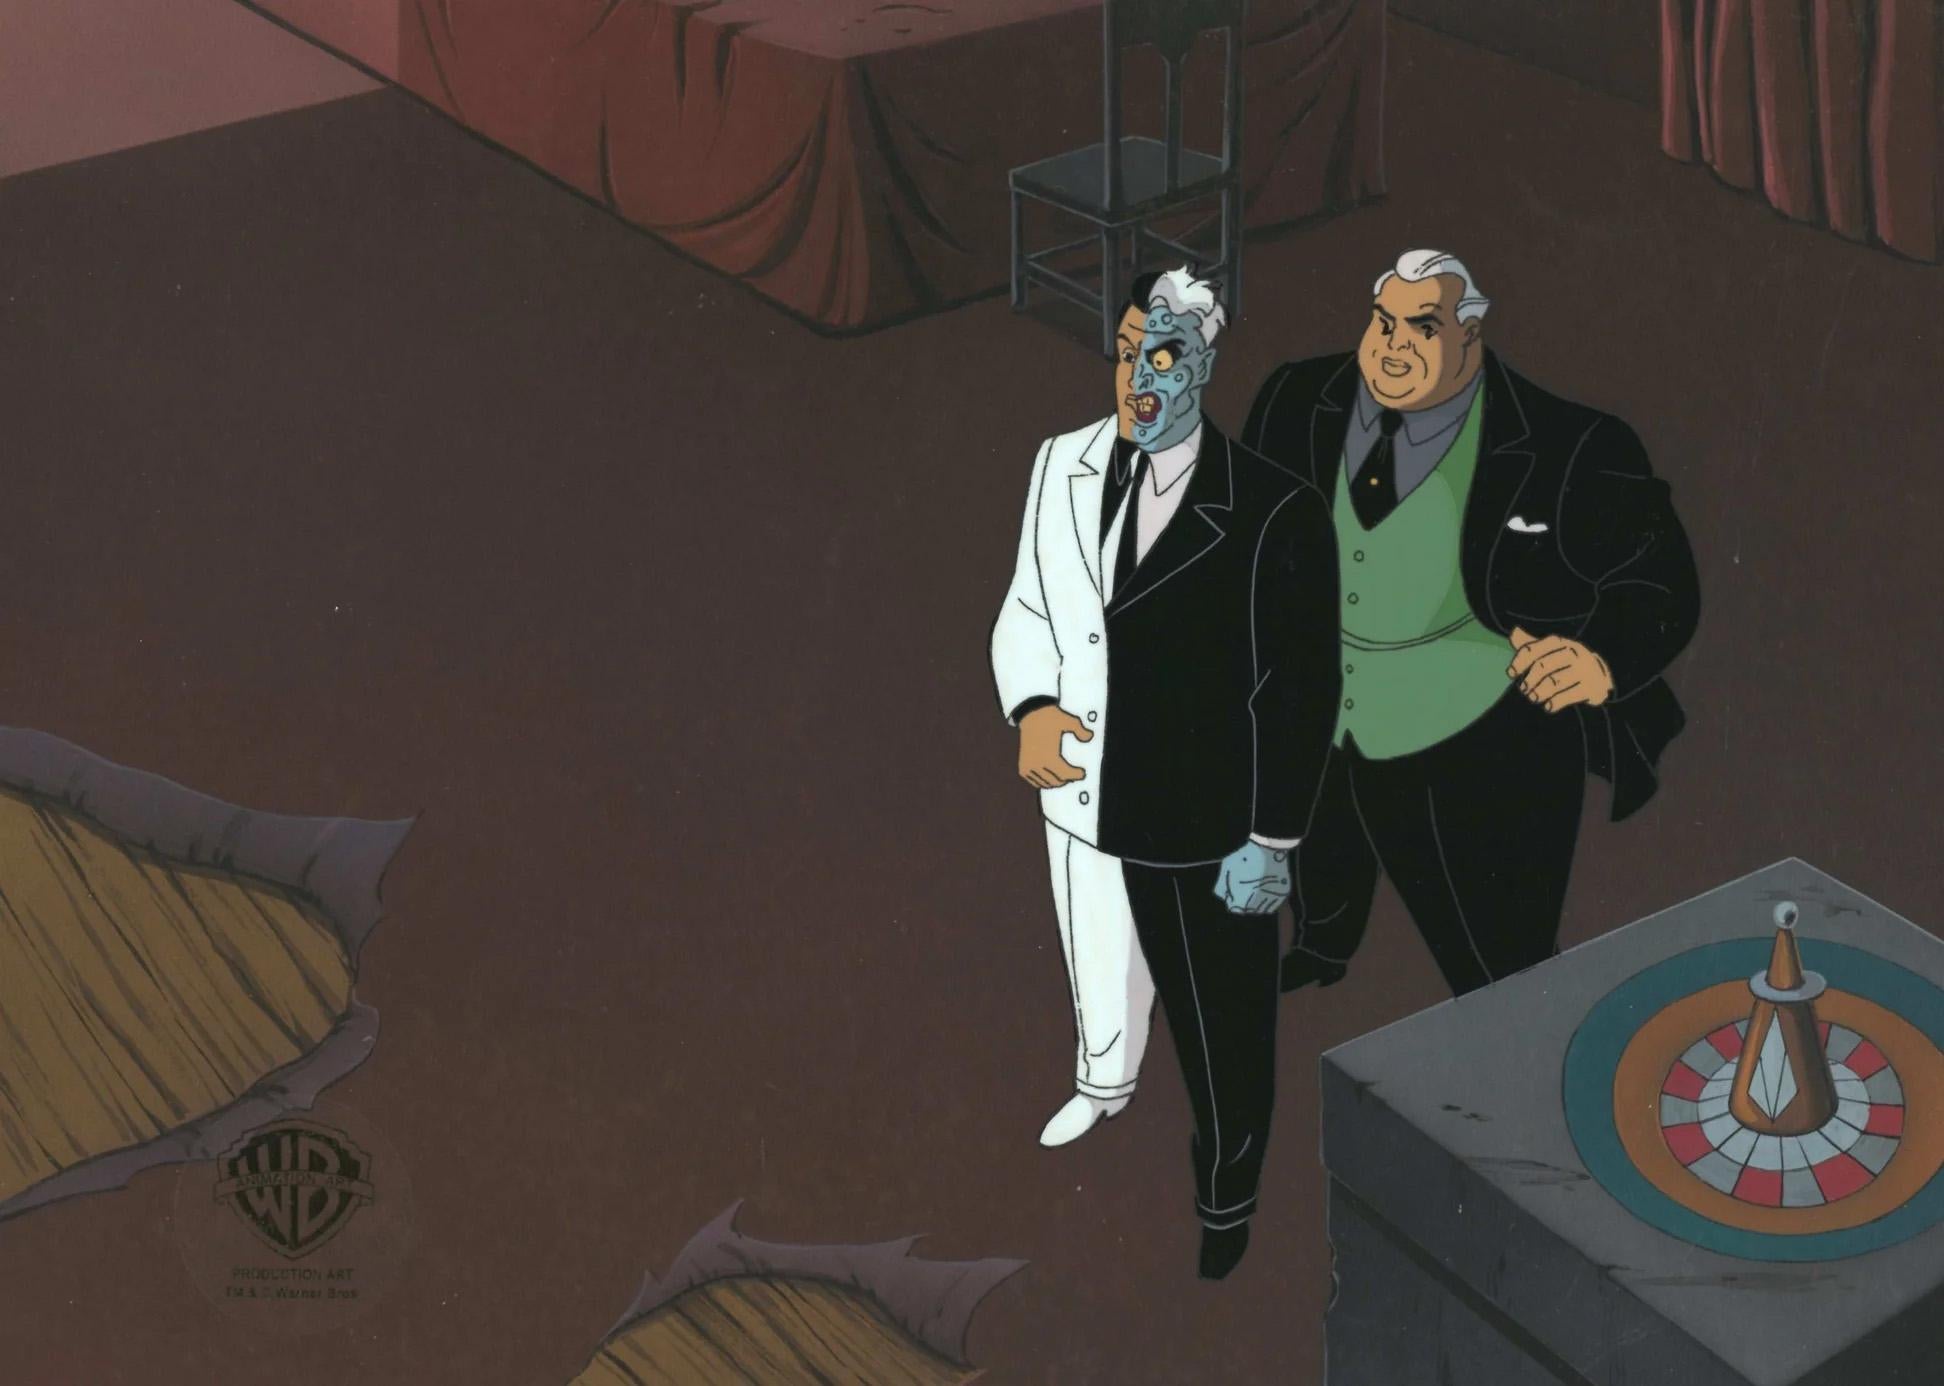 Batman The Animated Series Original Cel and Background: Two-Face, Rupert Thorne - Art by DC Comics Studio Artists